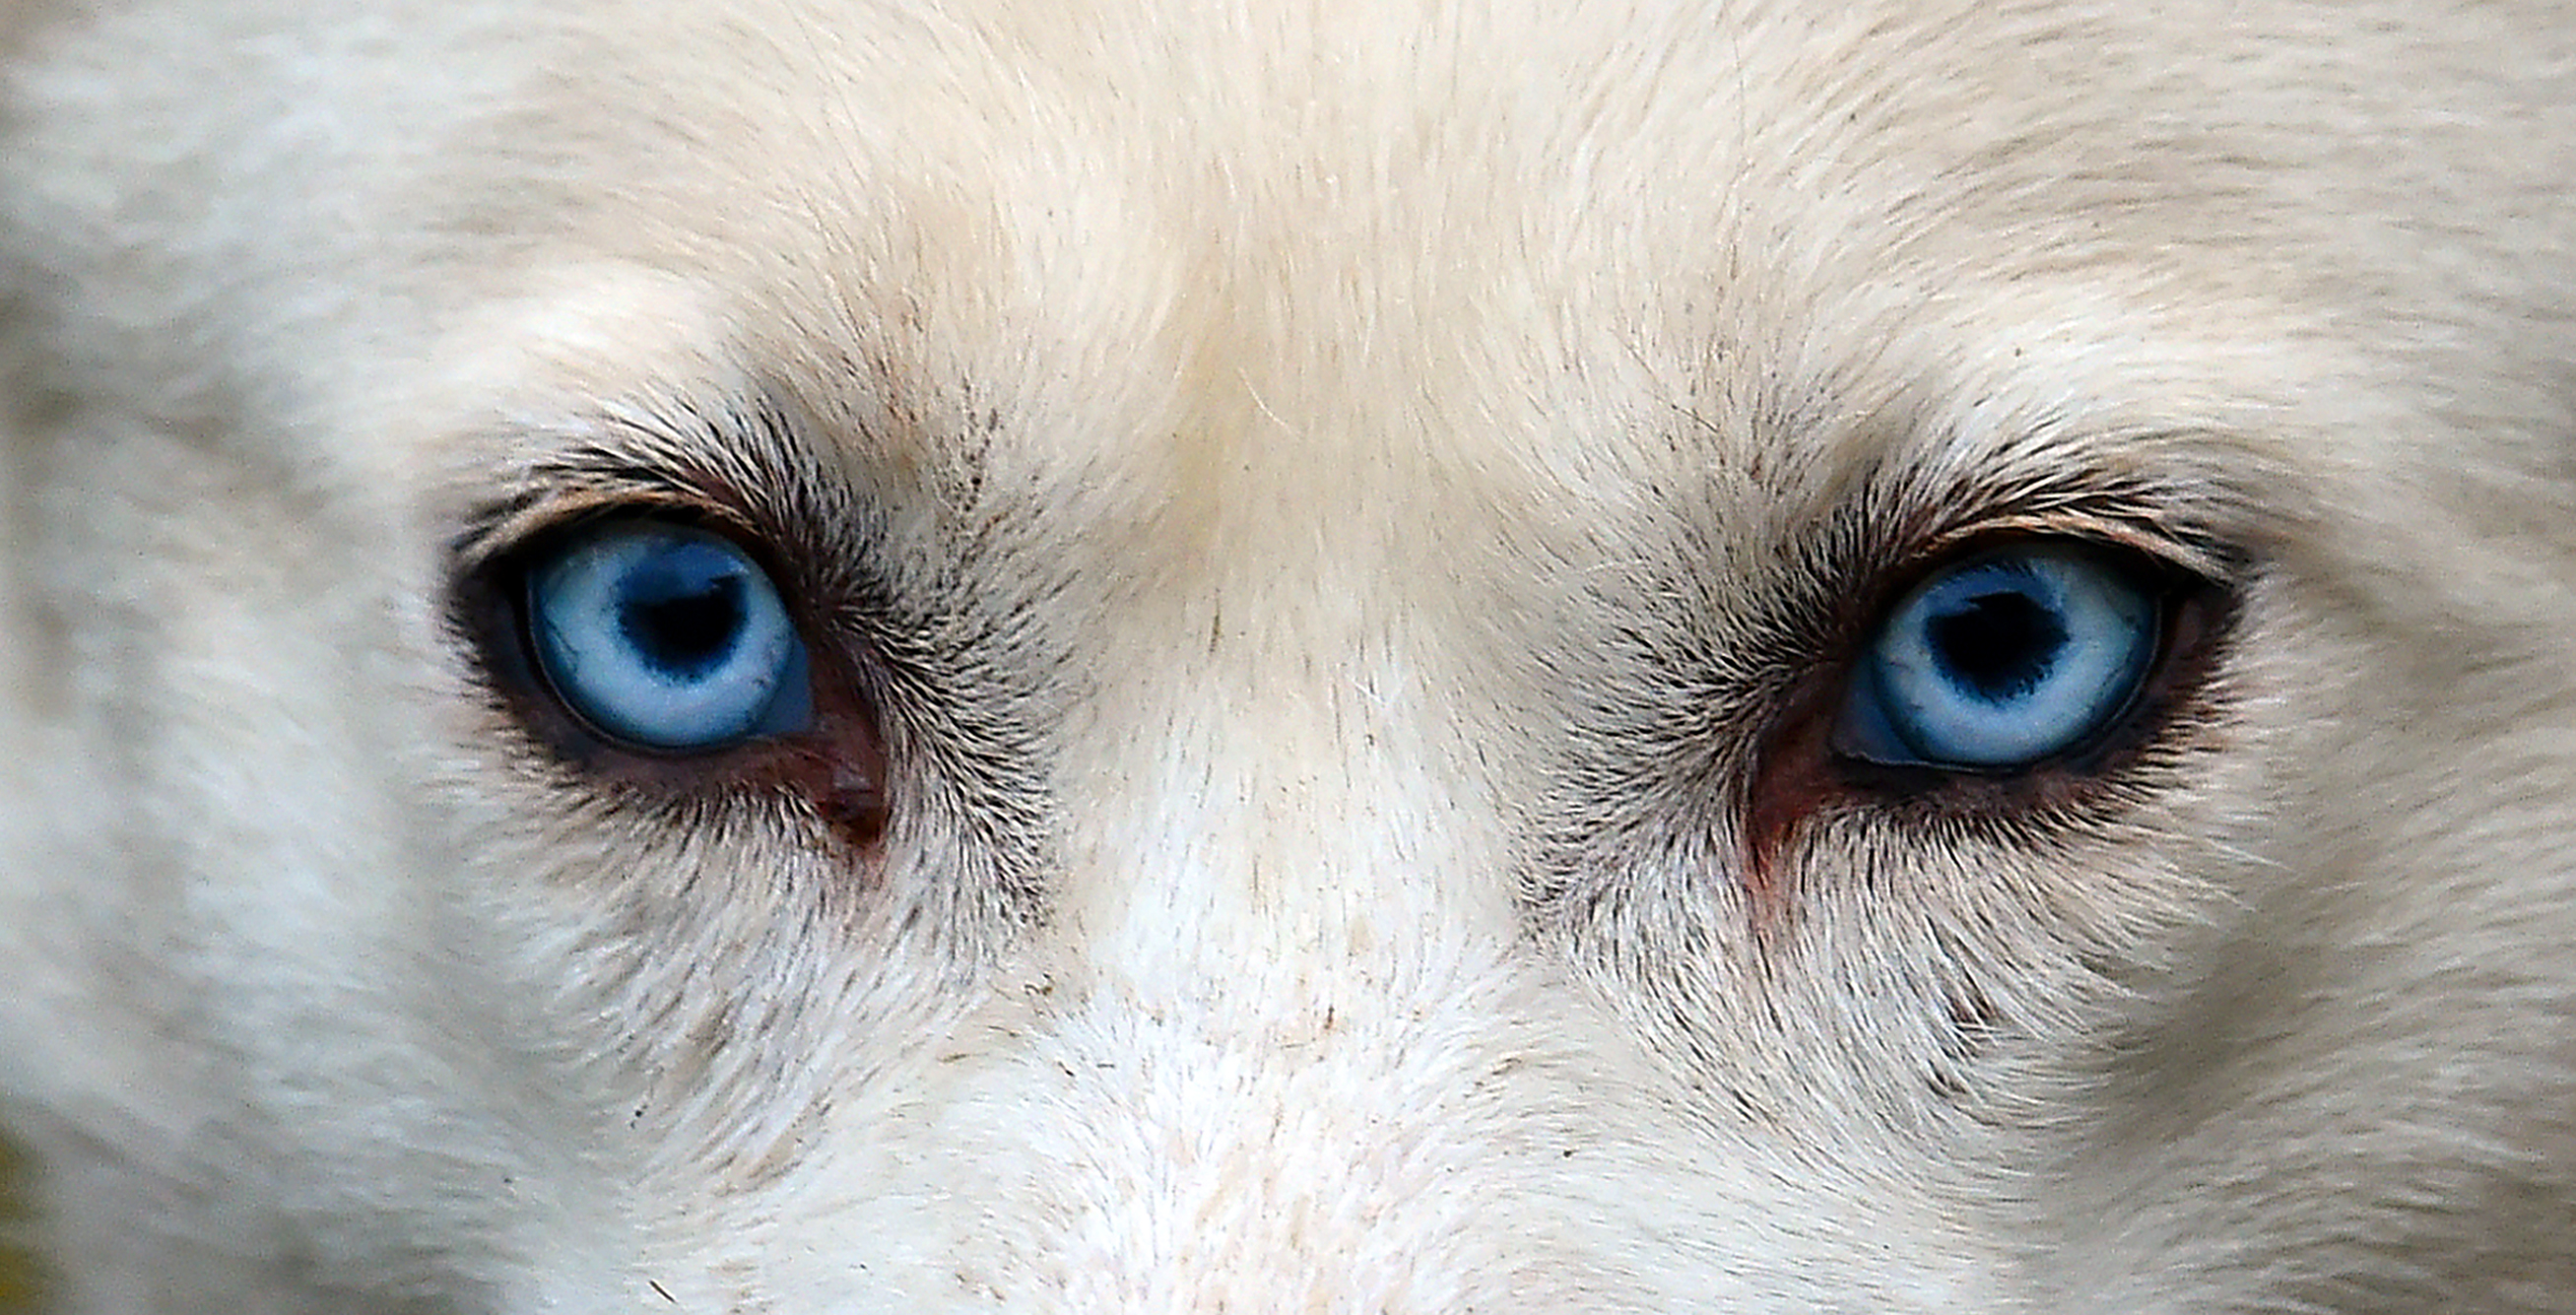 12 Dog Breeds With Striking Blue Eyes From Huskies To Great Danes